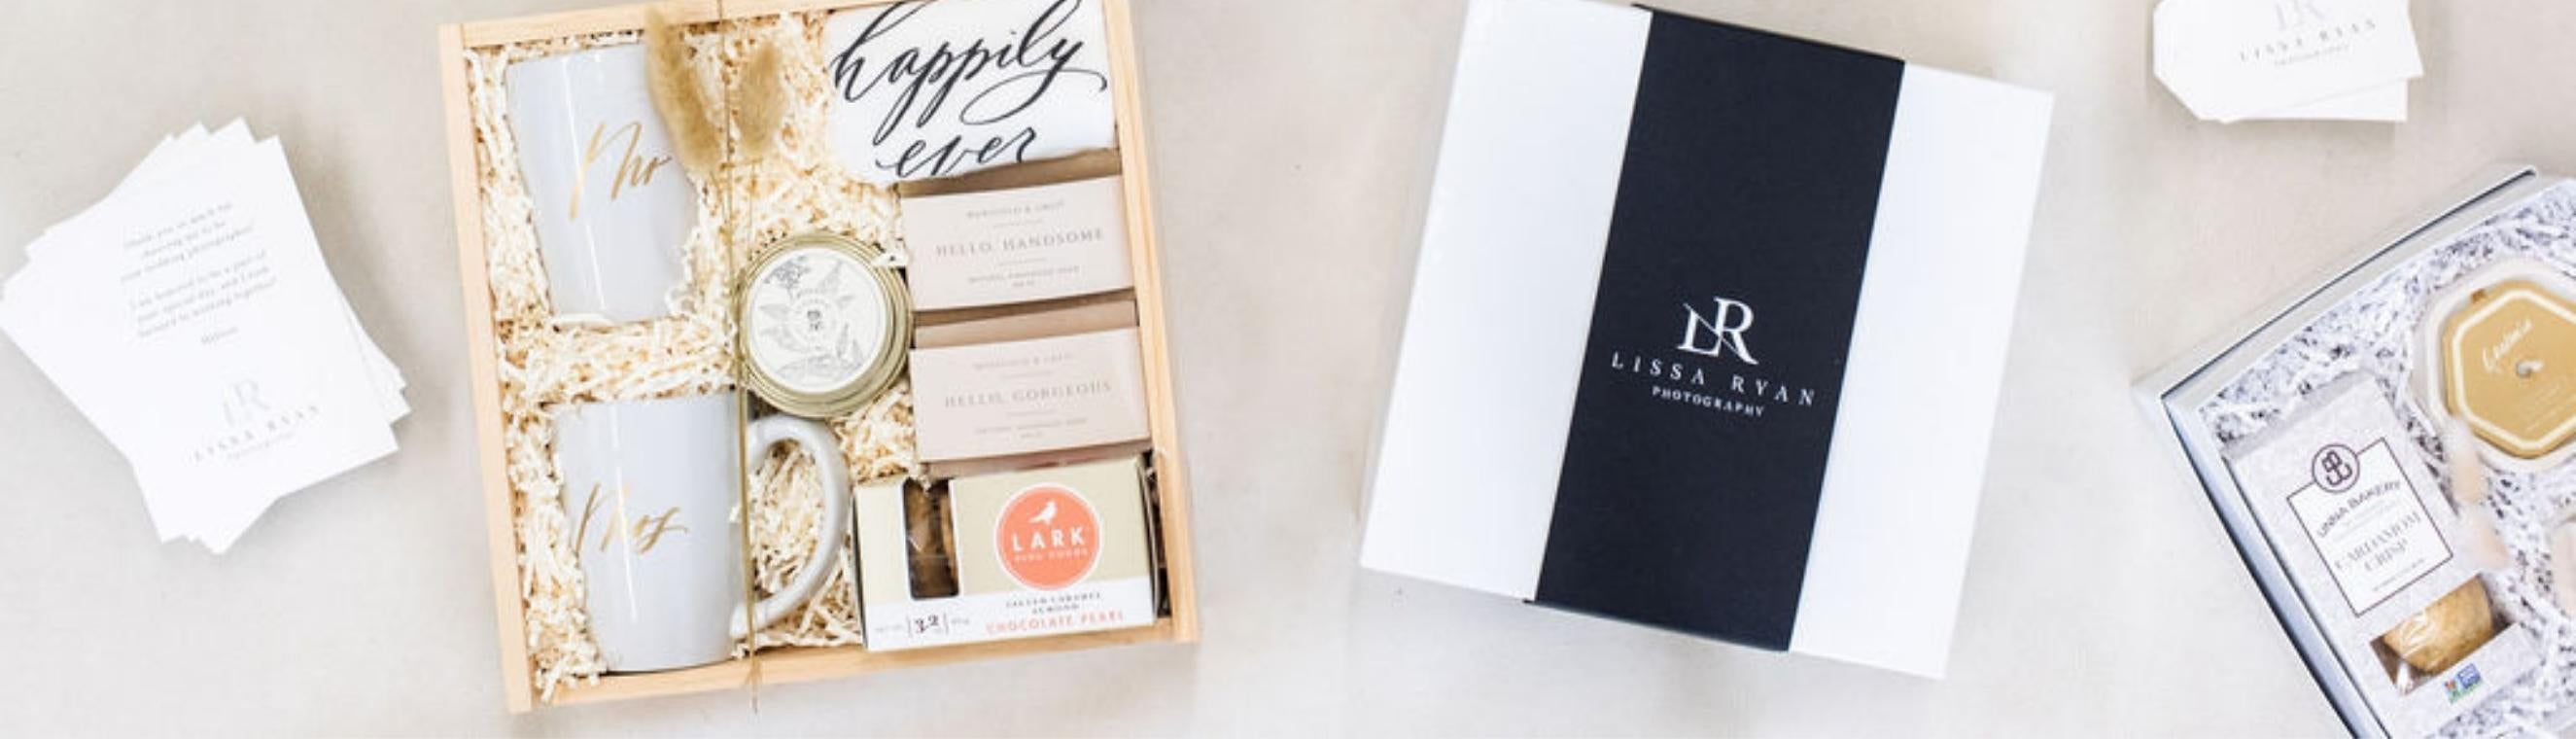 35 Practical but Fun Engagement Gifts Under $50